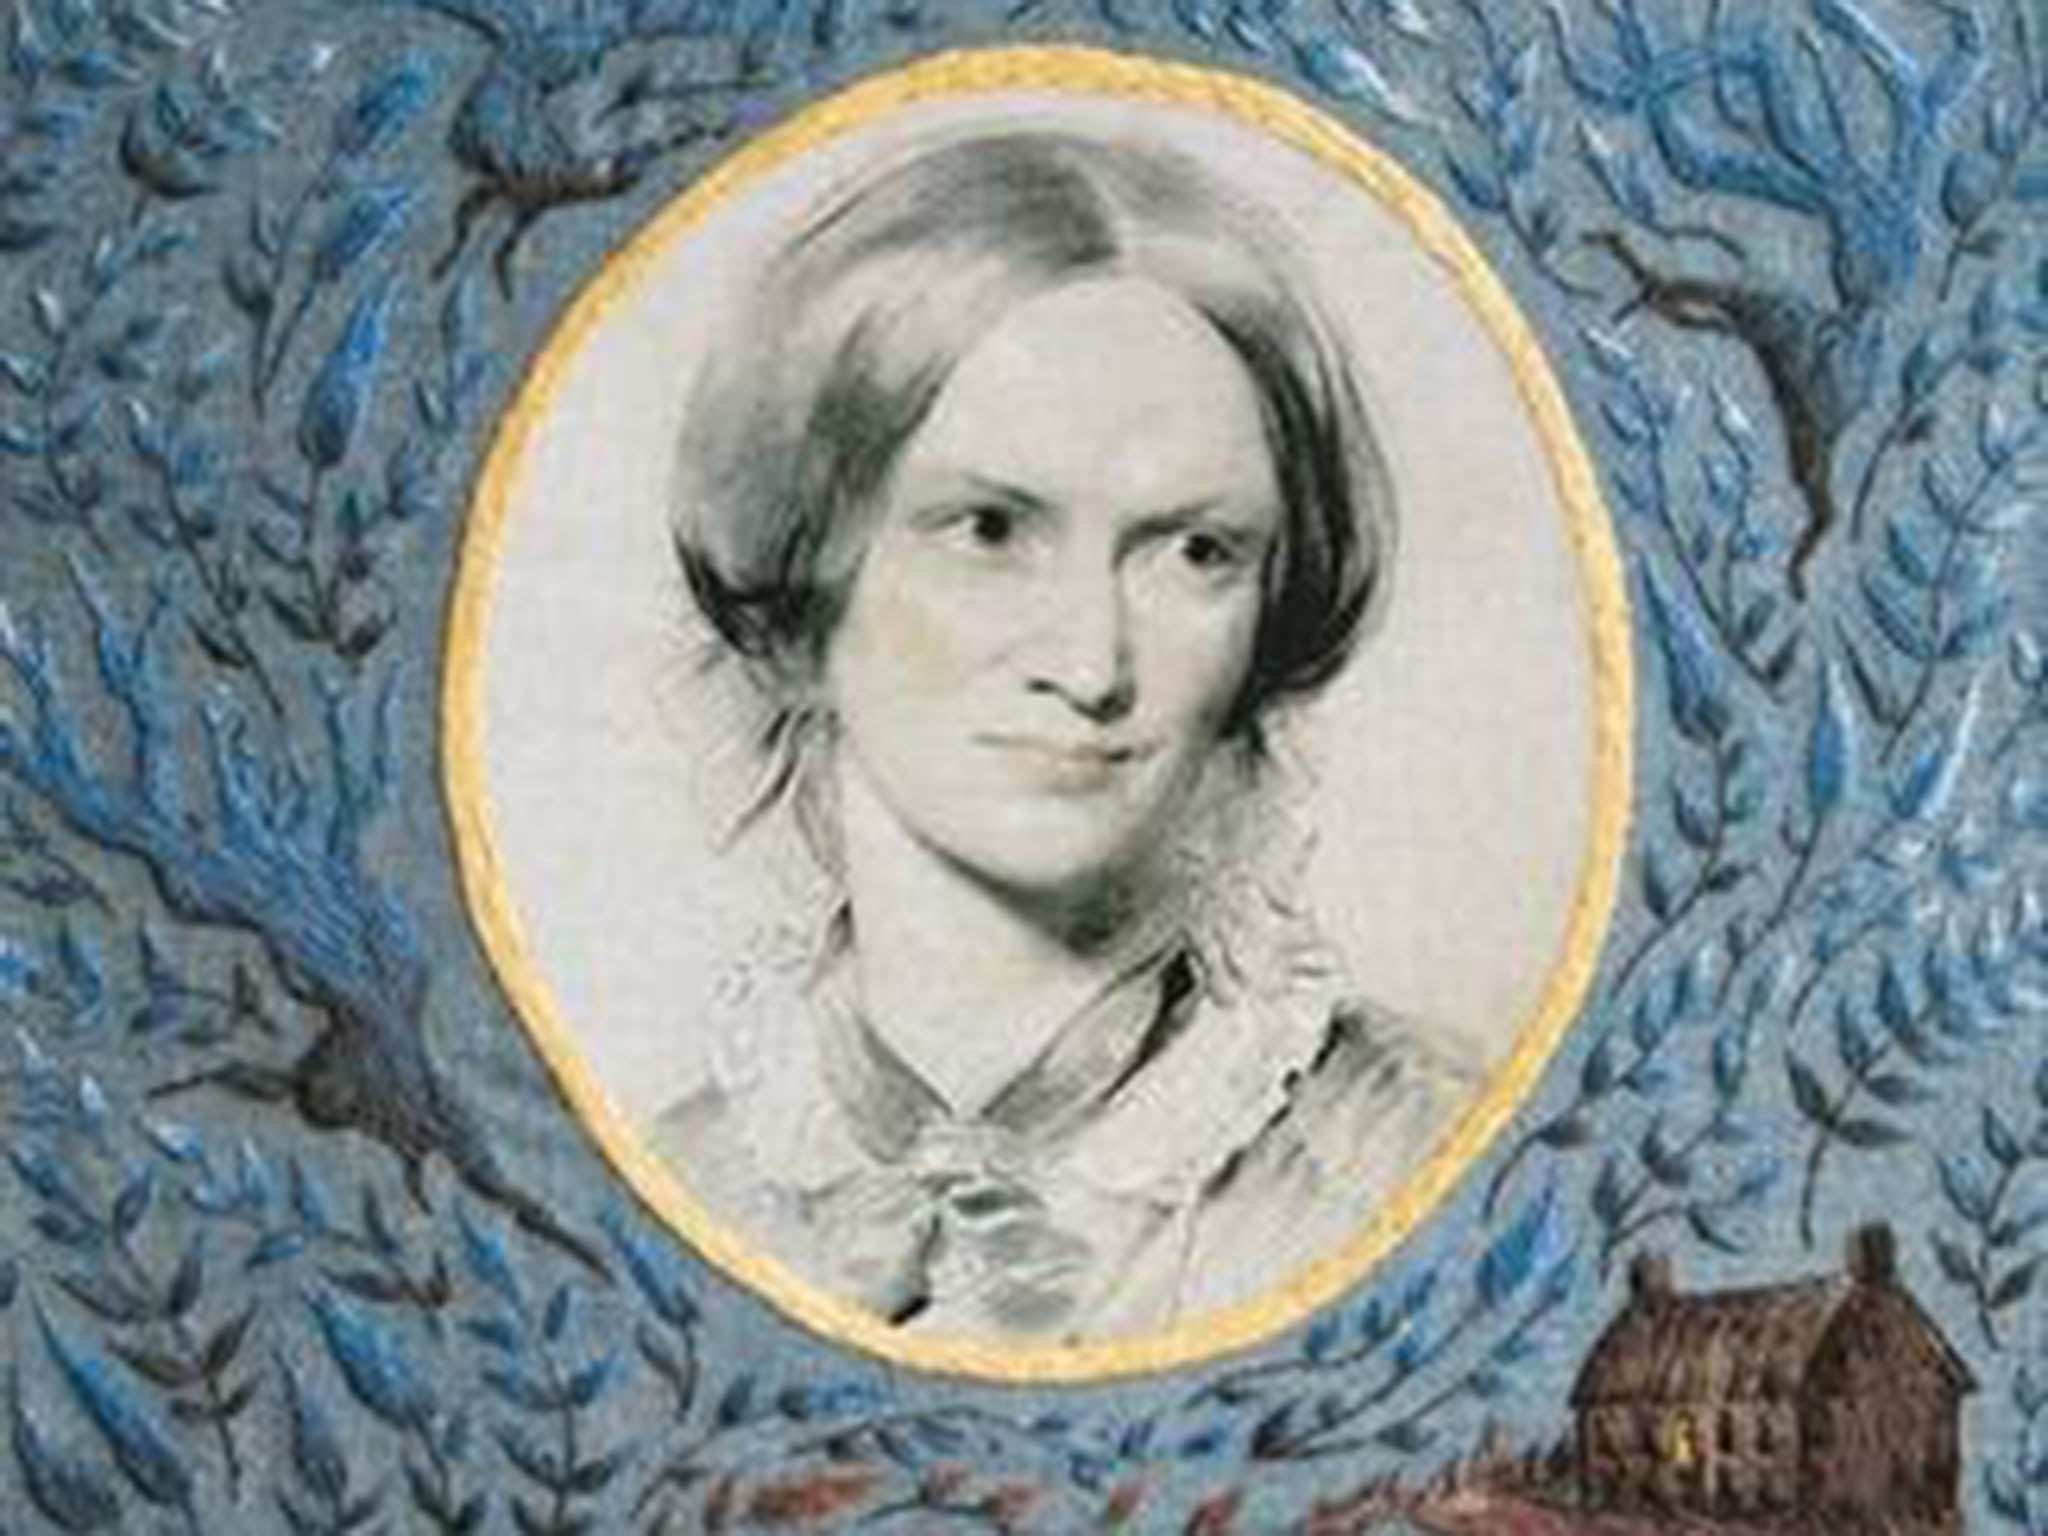 Charlotte Bronte A Life, by Claire Harman